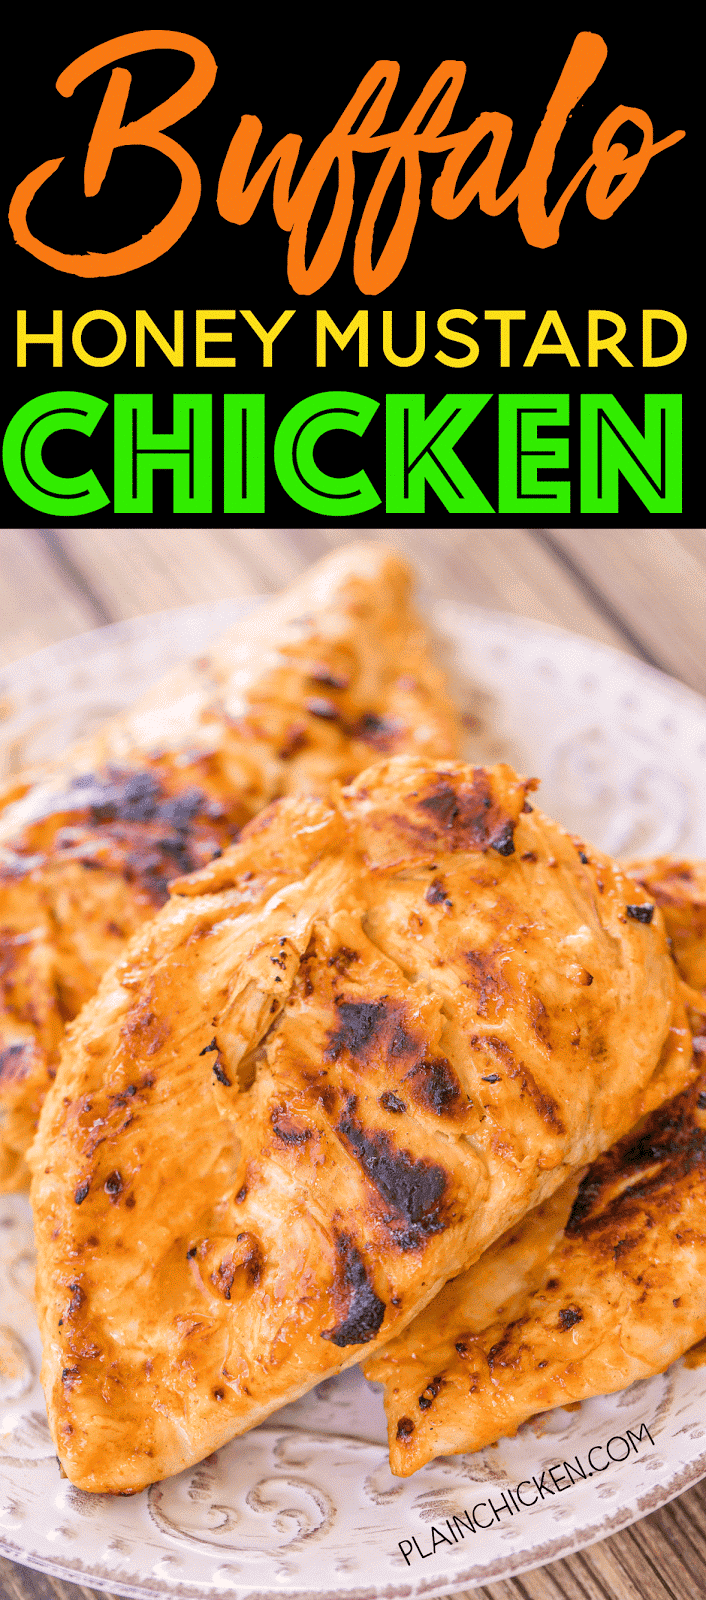 Buffalo Honey Mustard Chicken - only 3 ingredients! It sounds like a weird combination, but it is AMAZING! A real crowd pleaser. This will definitely be on our tailgating menu this Fall!